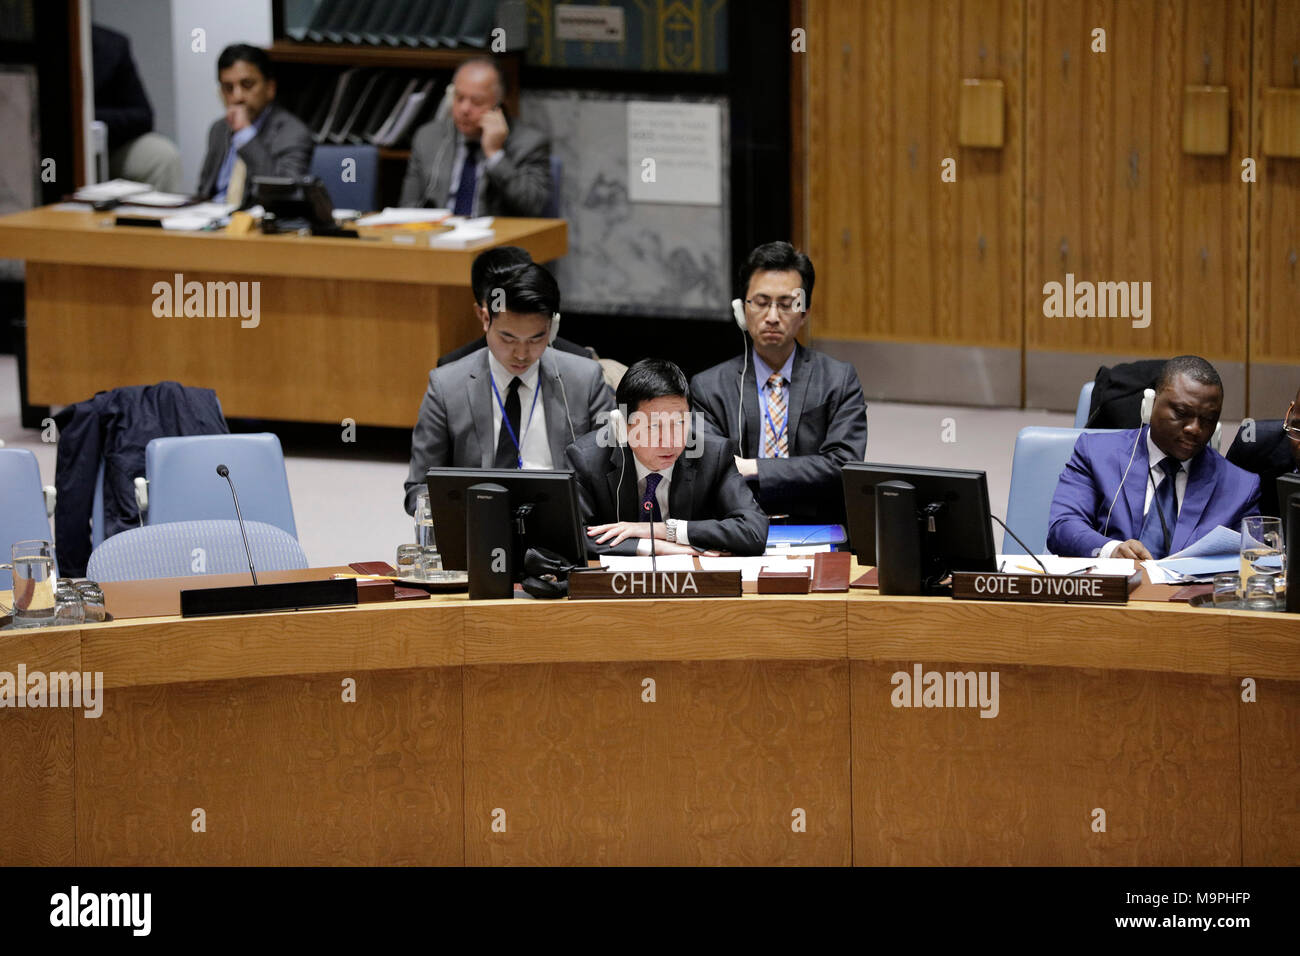 United Nations, UN headquarters in New York. 27th Mar, 2018. China's deputy permanent representative to the United Nations Wu Haitao (L, front) addresses a United Nations Security Council meeting on the humanitarian situation in Syria, at the UN headquarters in New York, March 27, 2018. UN Undersecretary-General for Humanitarian Affairs and Emergency Relief Coordinator Mark Lowcock said Tuesday that the last few months have been some of the worst for Syrian civilians as a result of ongoing violence. Credit: Li Muzi/Xinhua/Alamy Live News Stock Photo